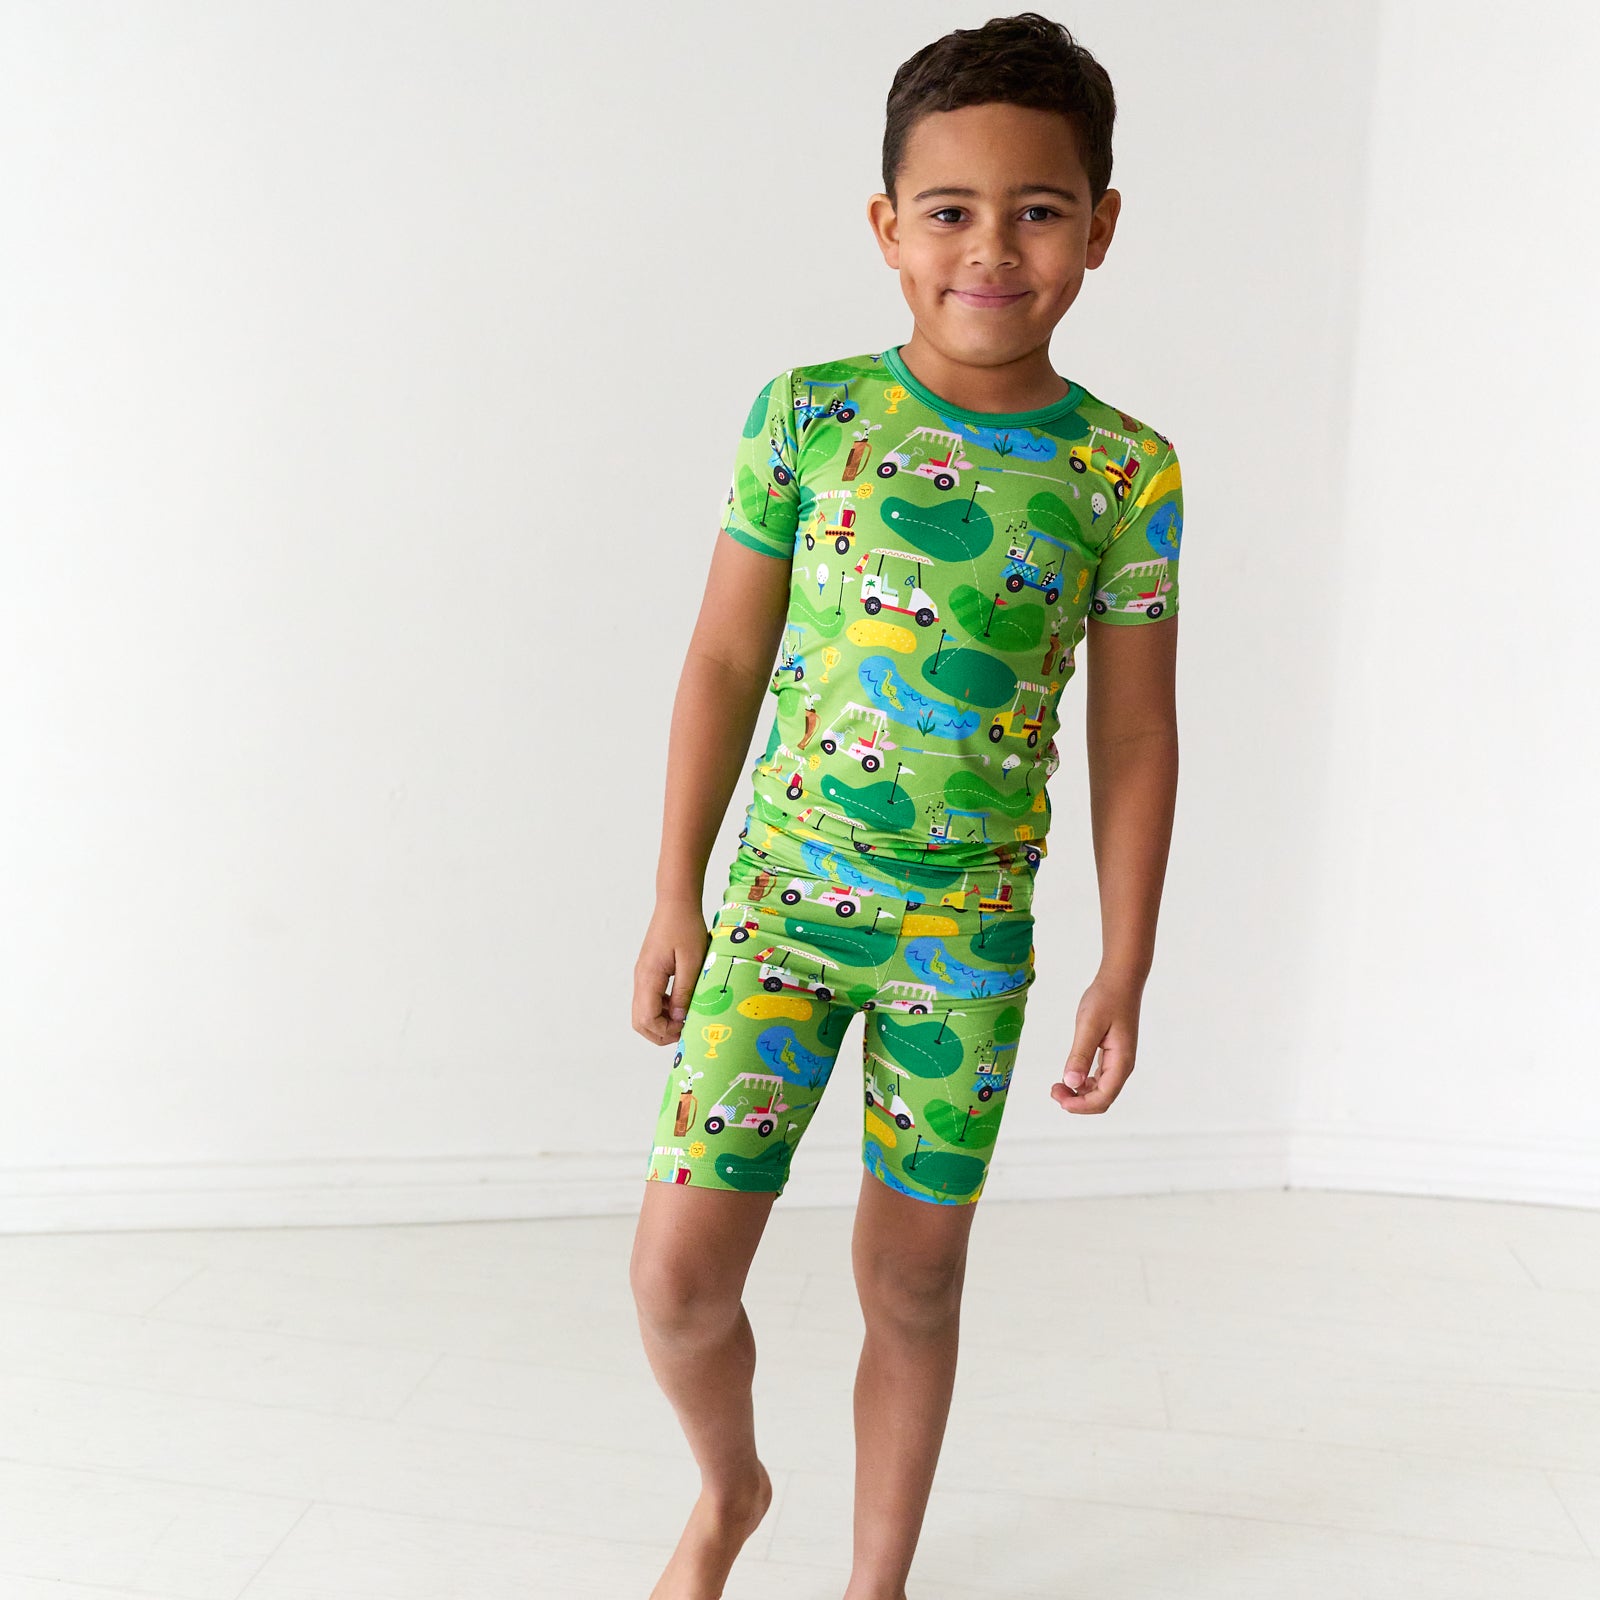 Alternate image of a child wearing a Fairway Fun two-piece short sleeve and shorts pajama set